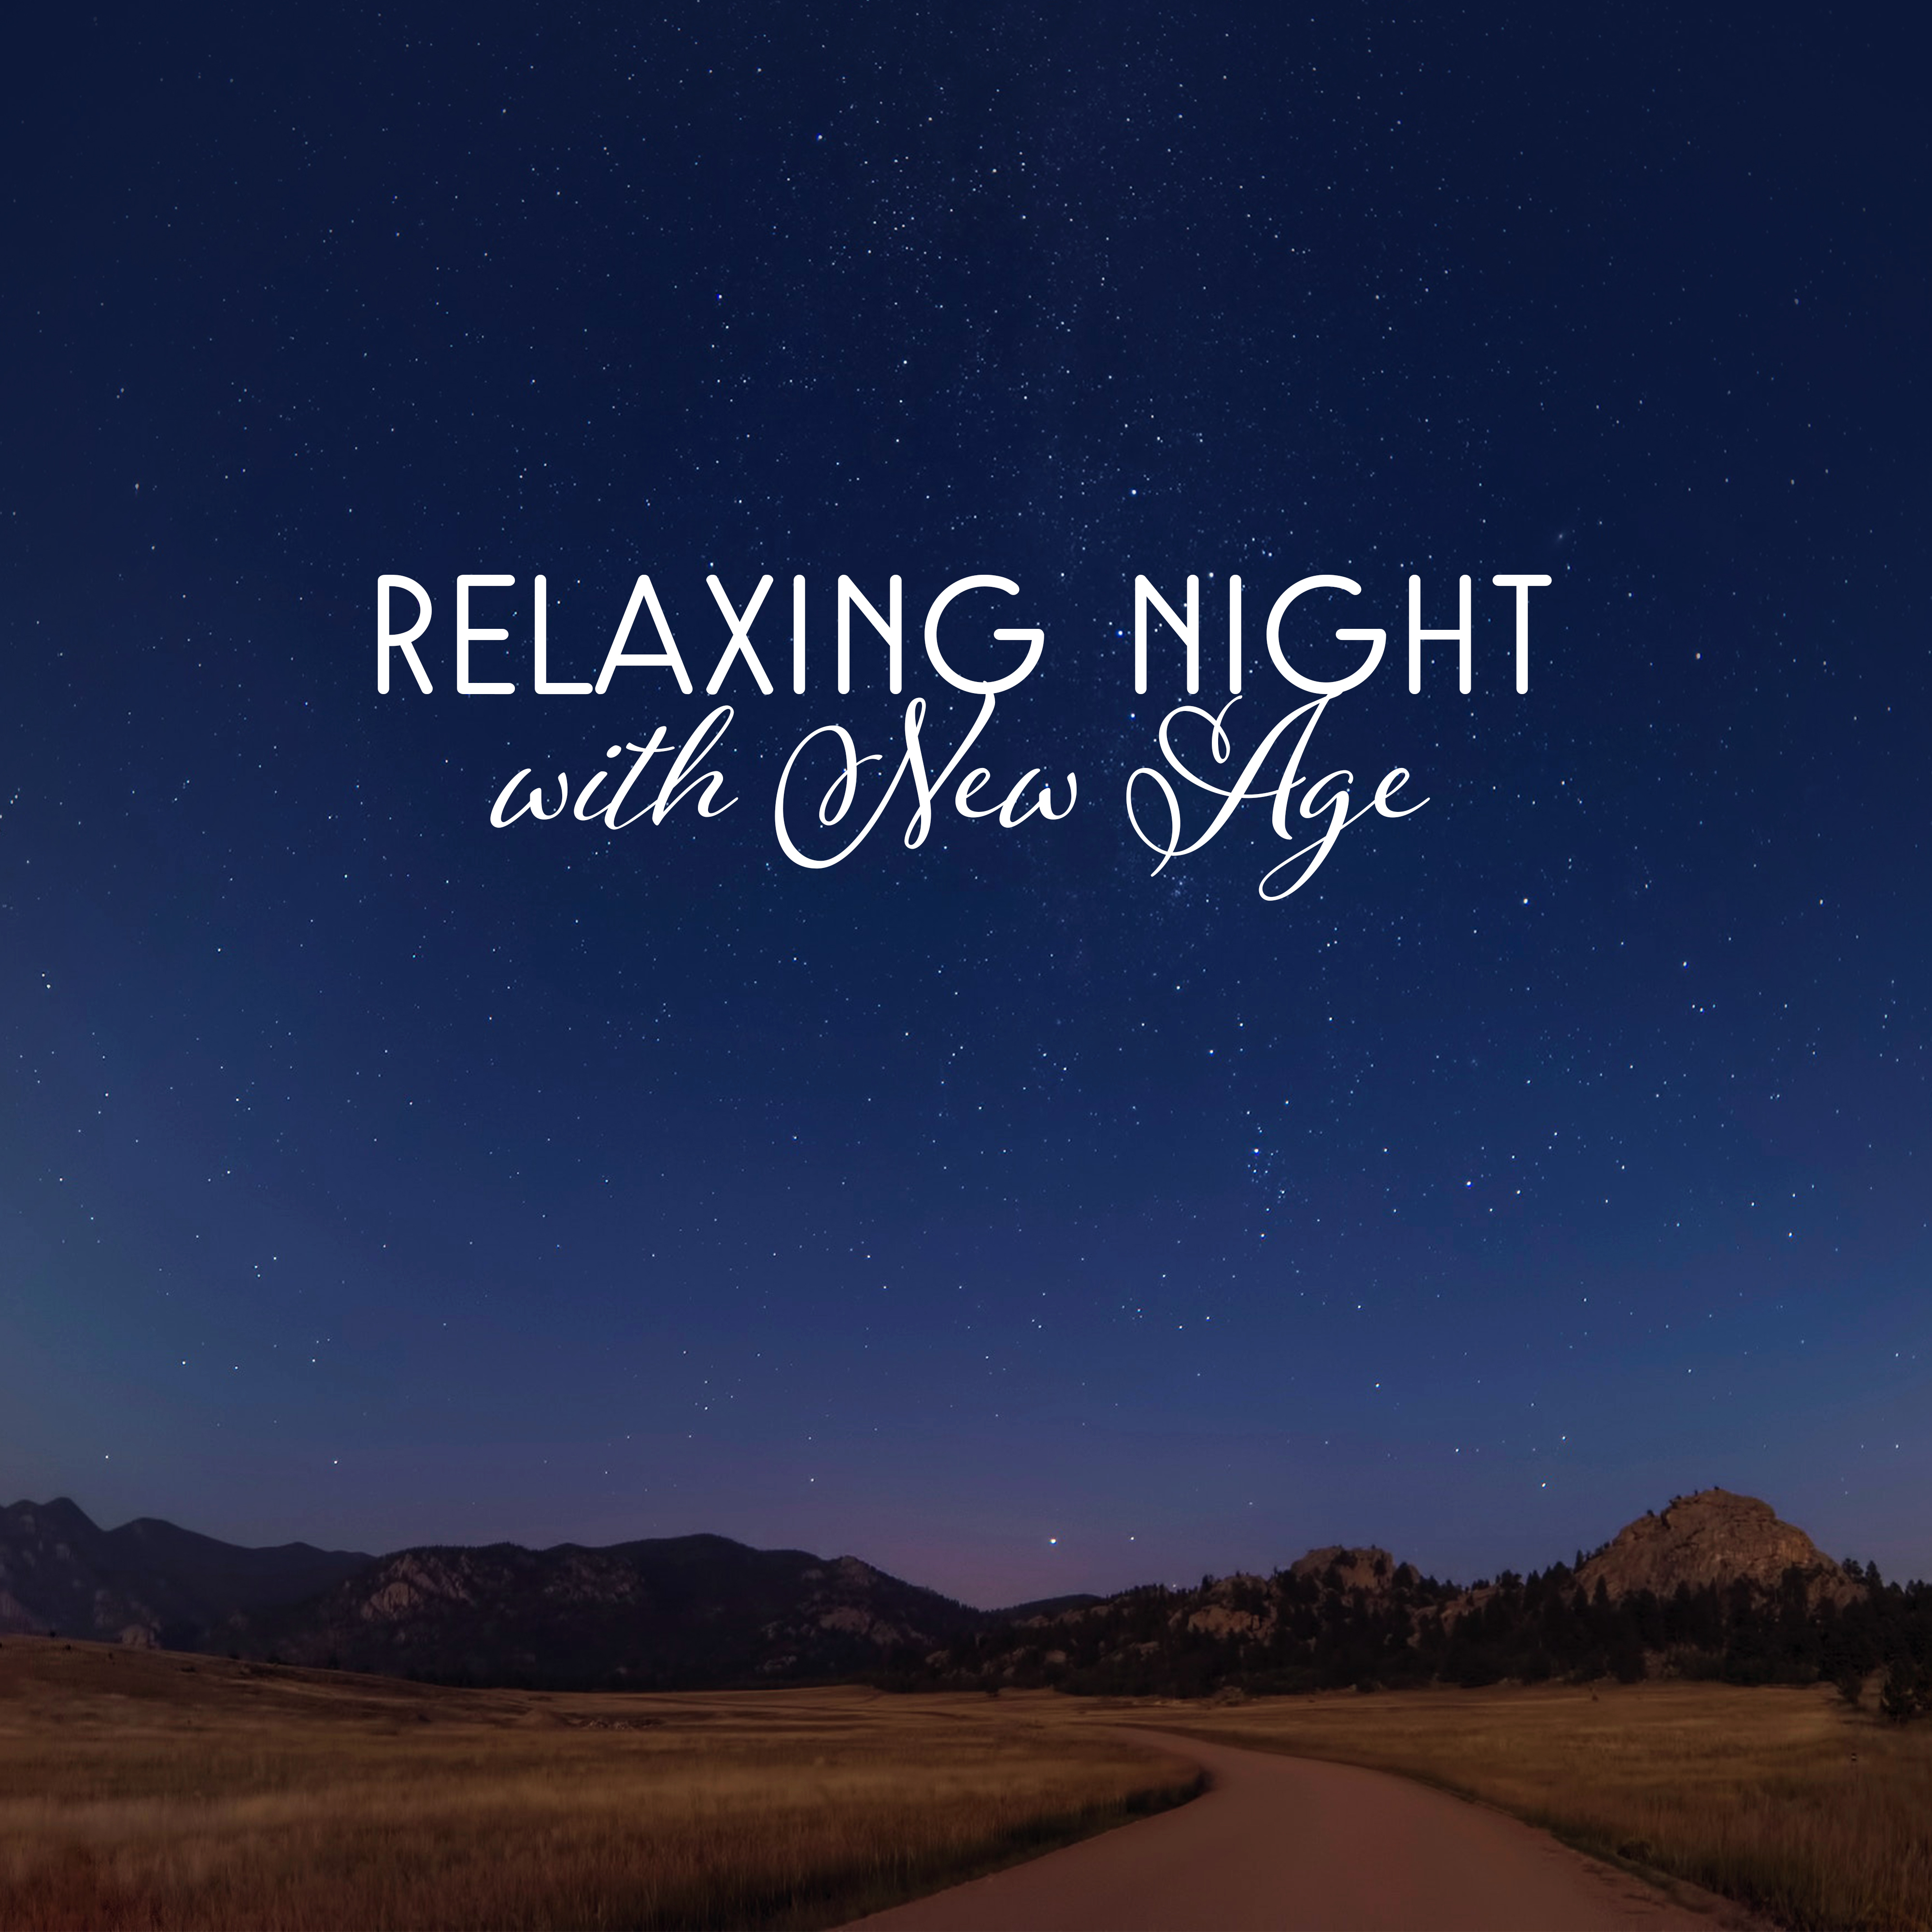 Relaxing Night with New Age – Calm Music for Night, Peaceful Mind & Body, Easy Listening, New Age Music